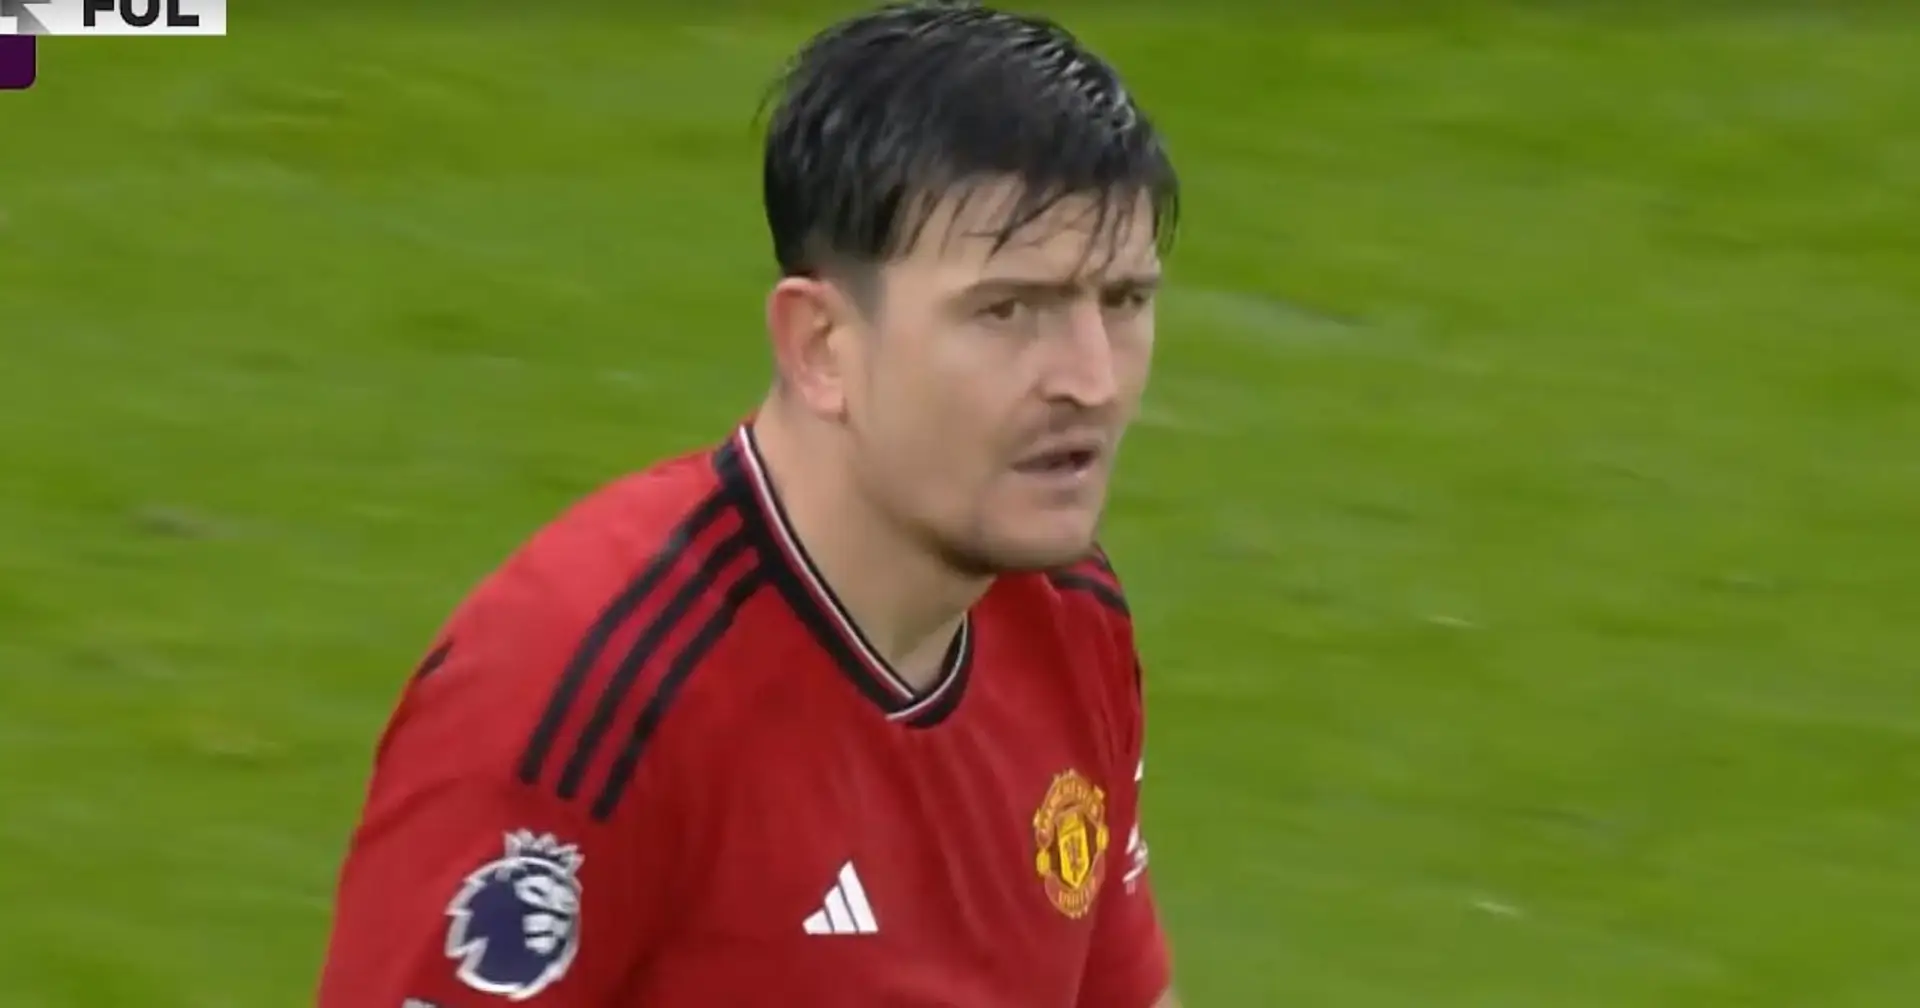 Maguire – 7, Rashford – 3: rating Man United players in Fulham loss